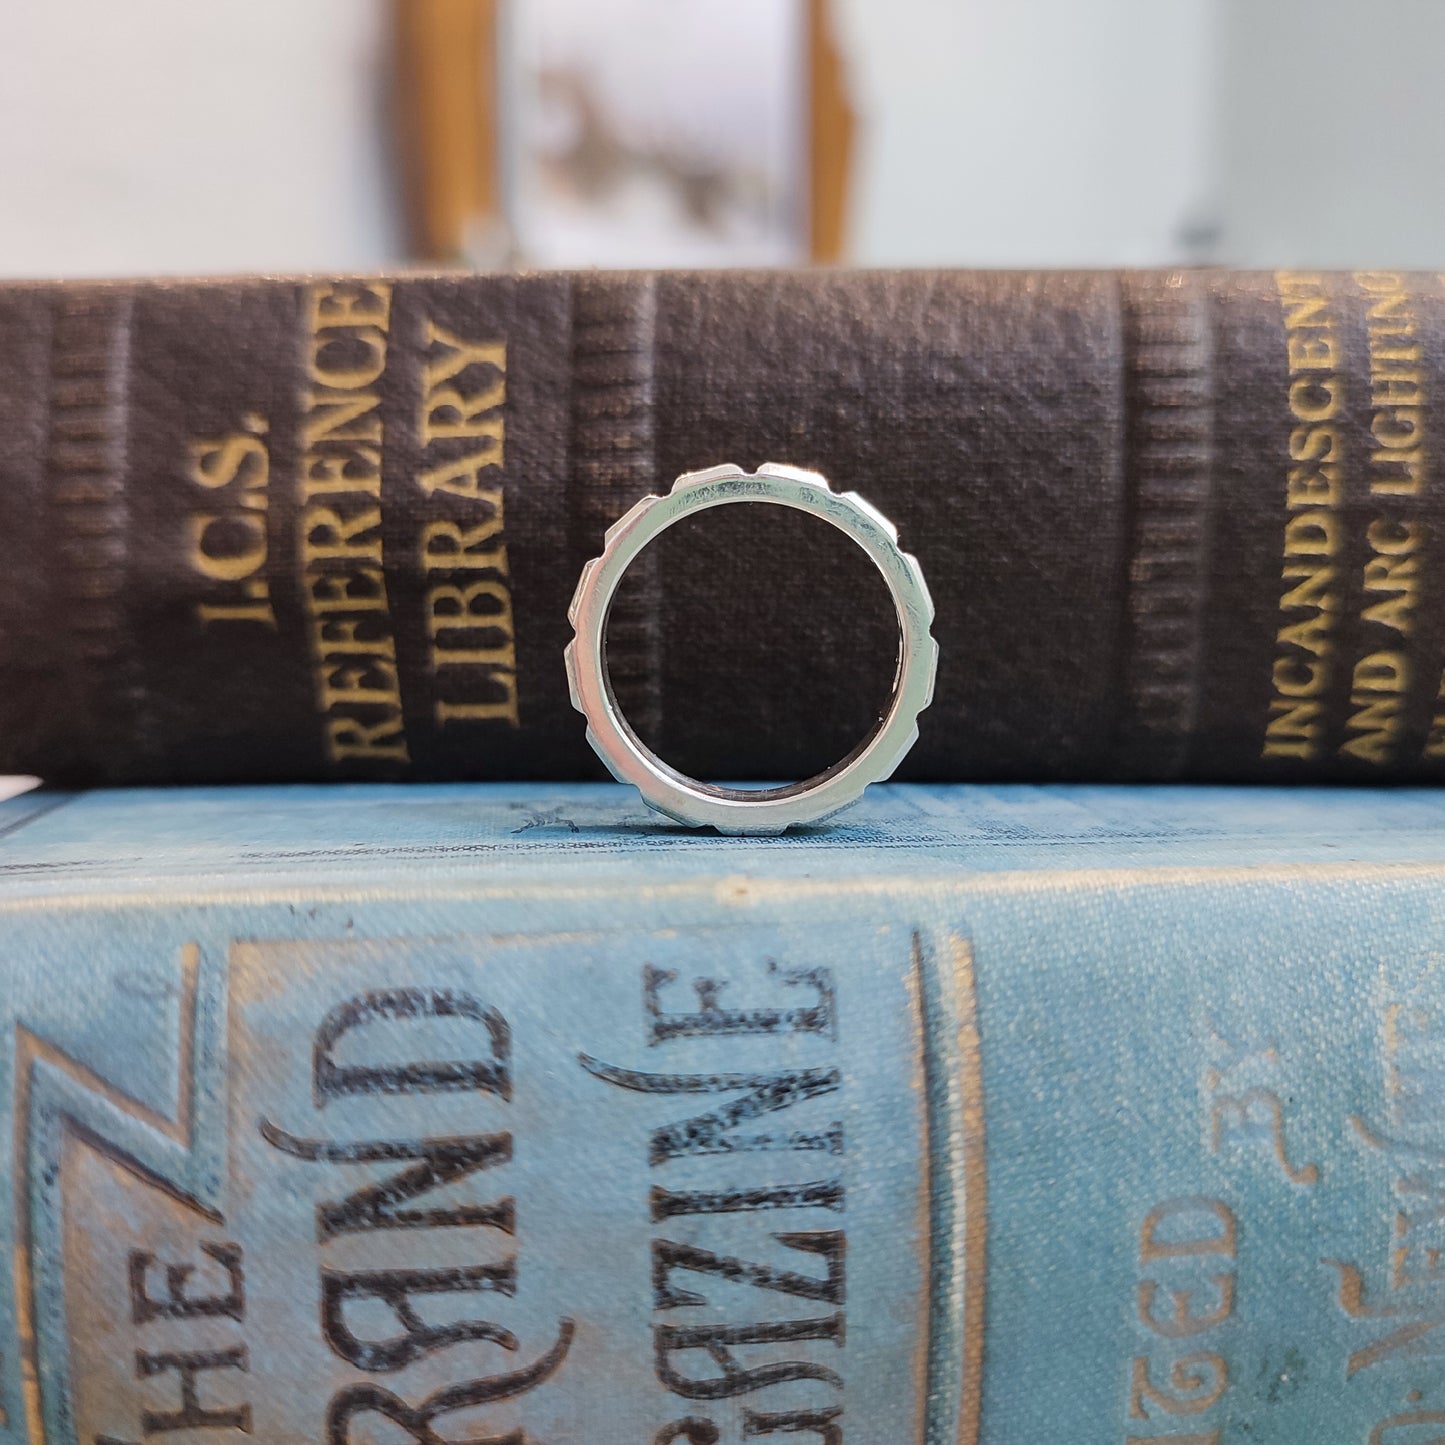 IN * MEMORY * OF *  Victorian style Memorial Ring in Silver